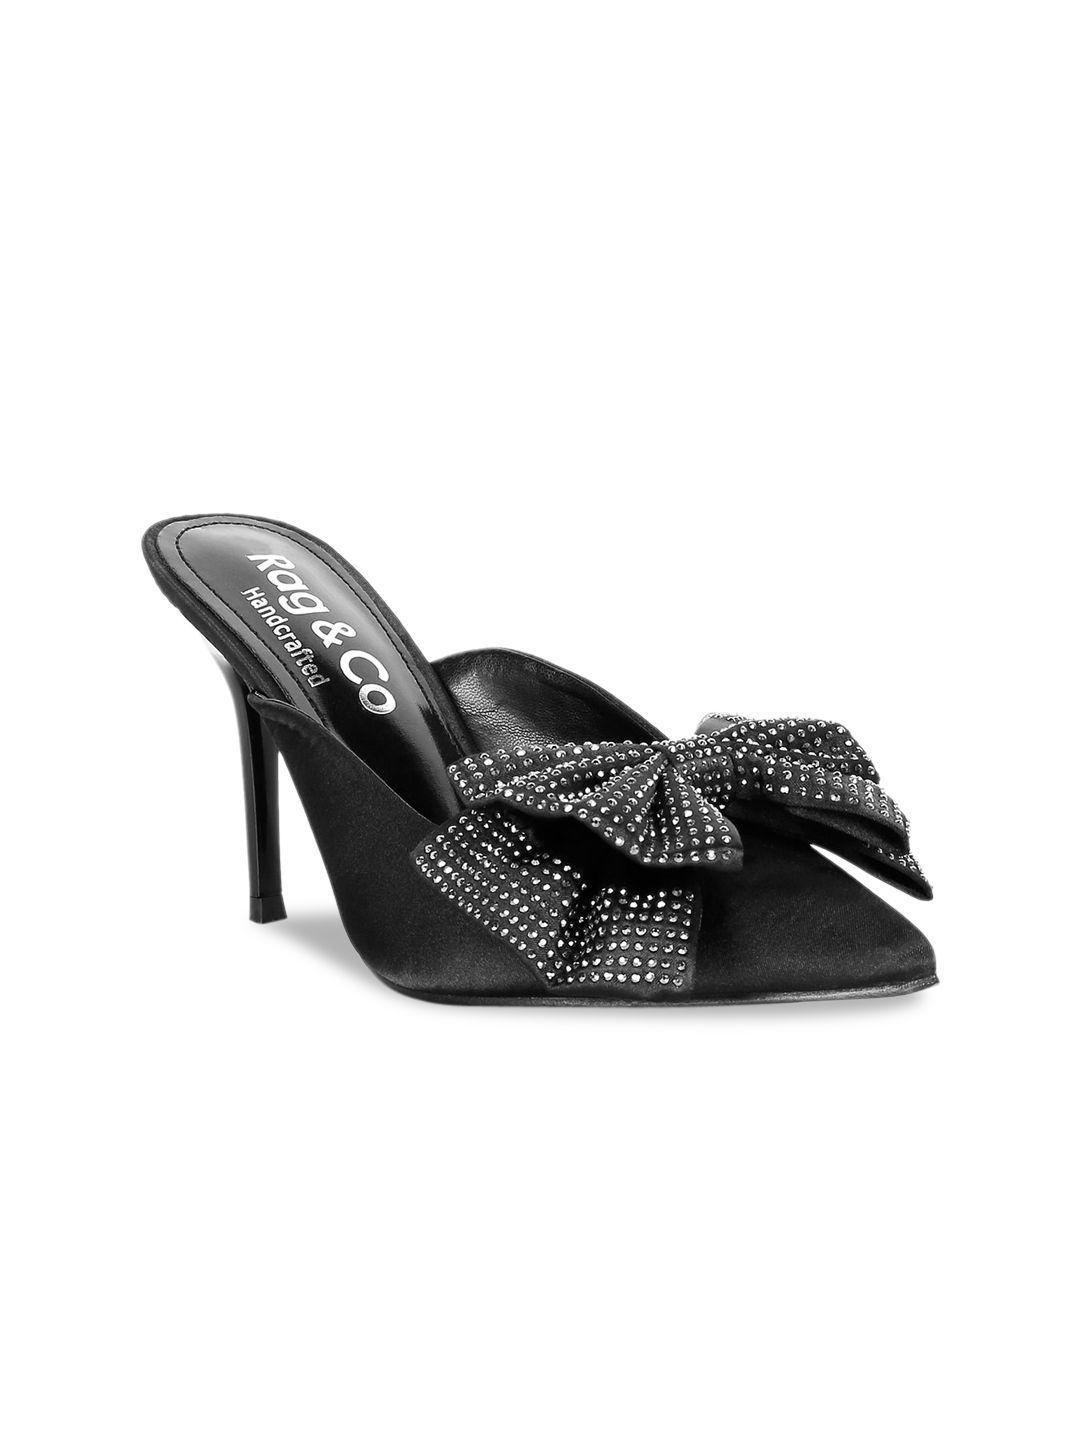 rag-&-co-black-party-stiletto-pumps-with-bows